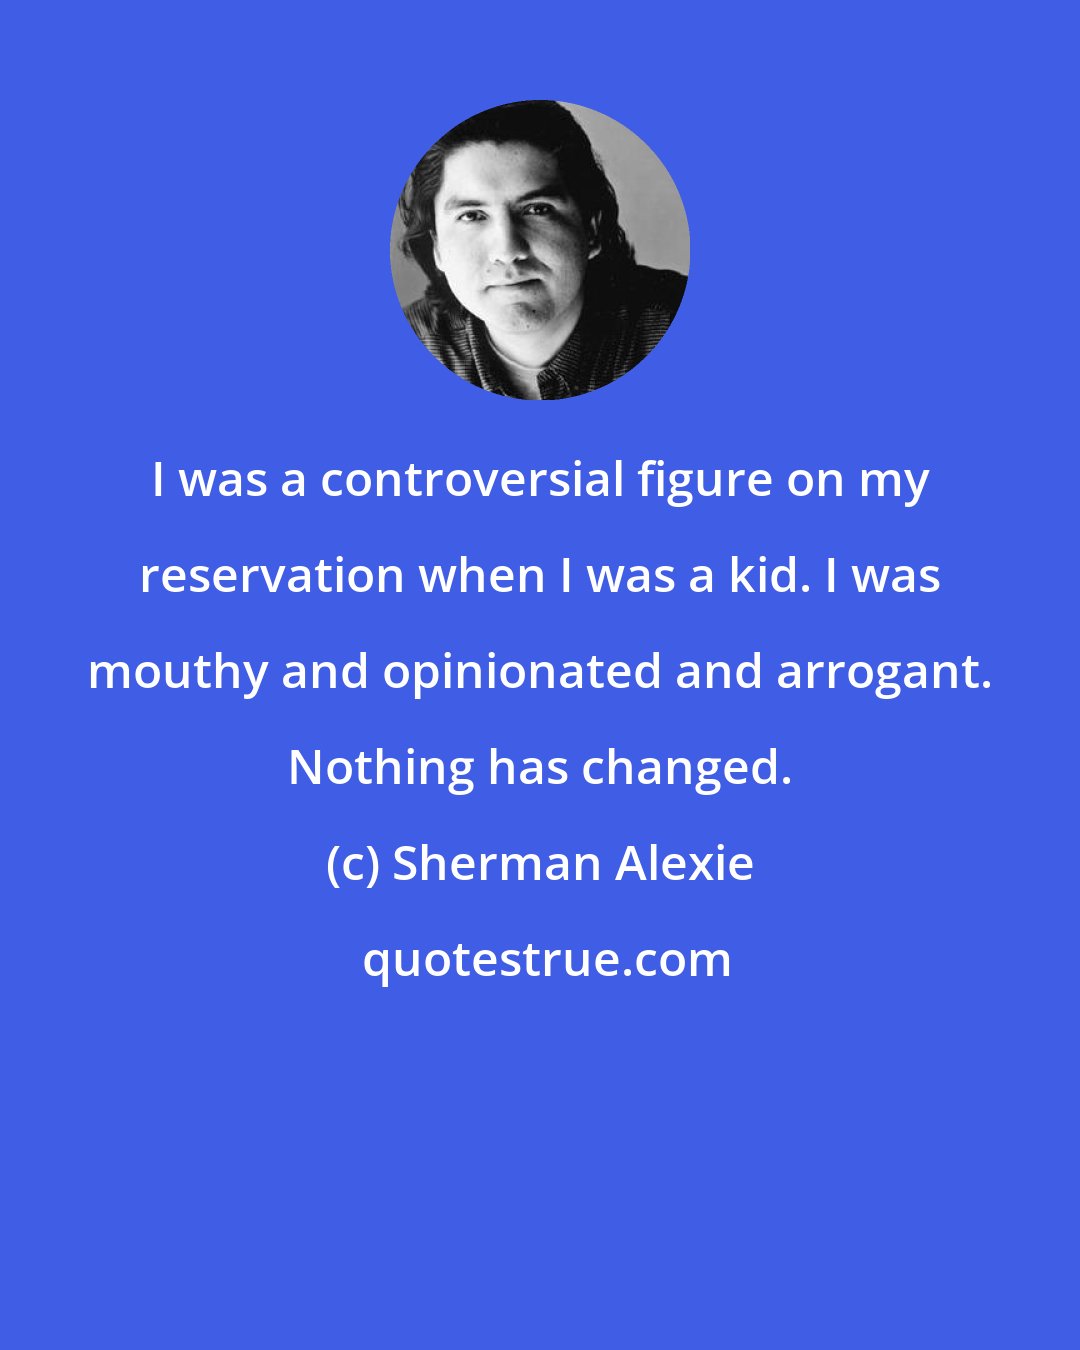 Sherman Alexie: I was a controversial figure on my reservation when I was a kid. I was mouthy and opinionated and arrogant. Nothing has changed.